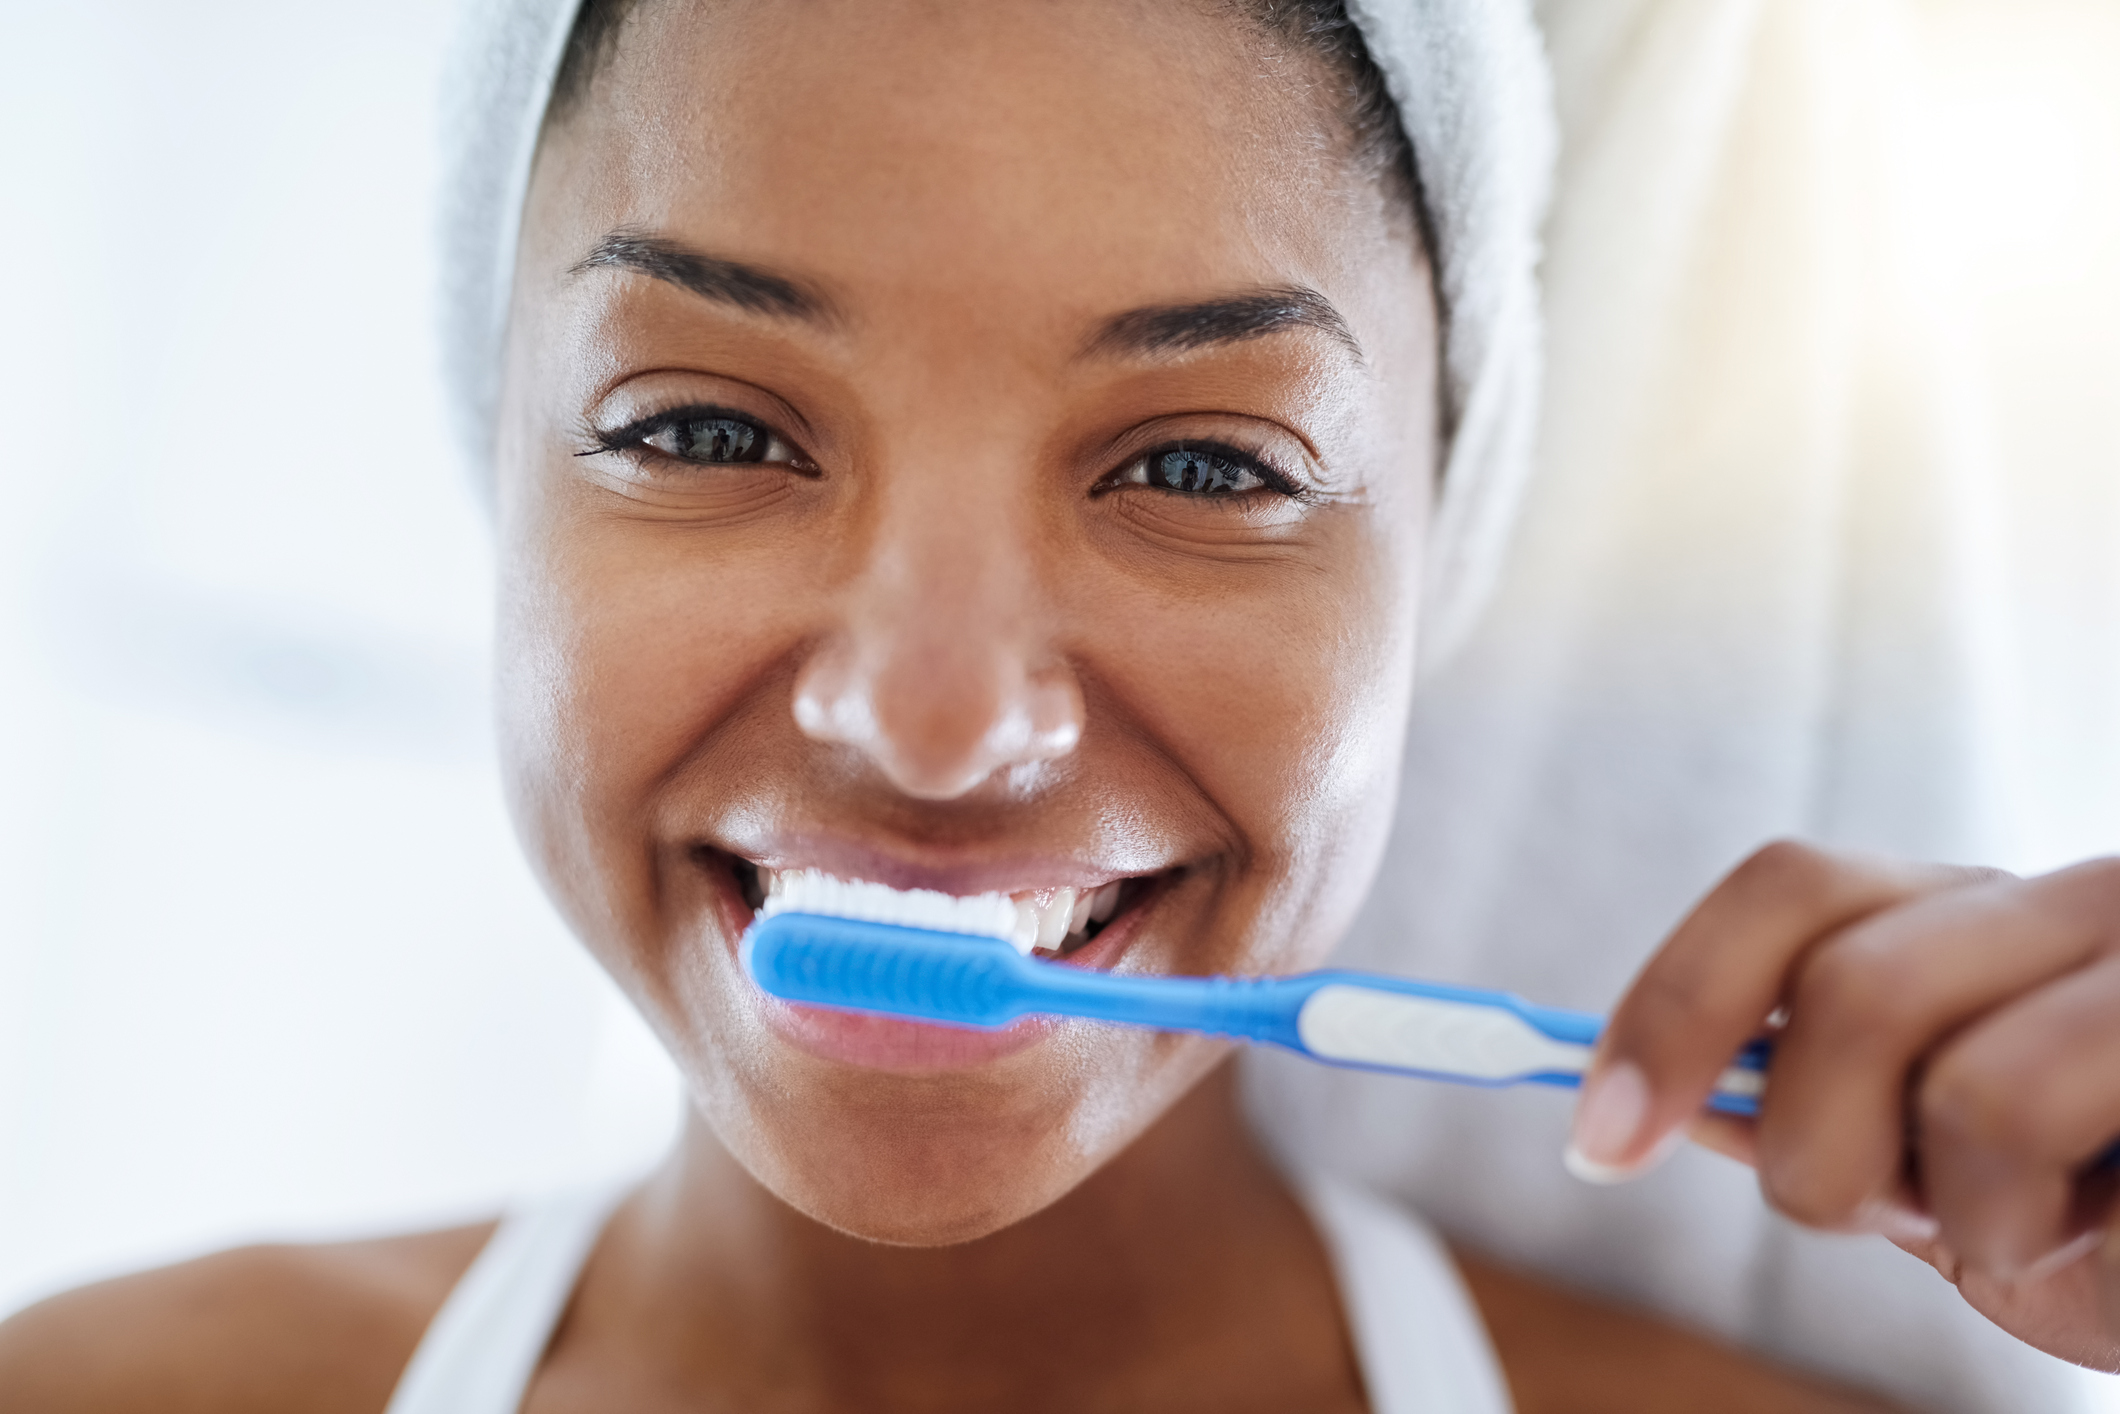 Get brushing for a bright smile